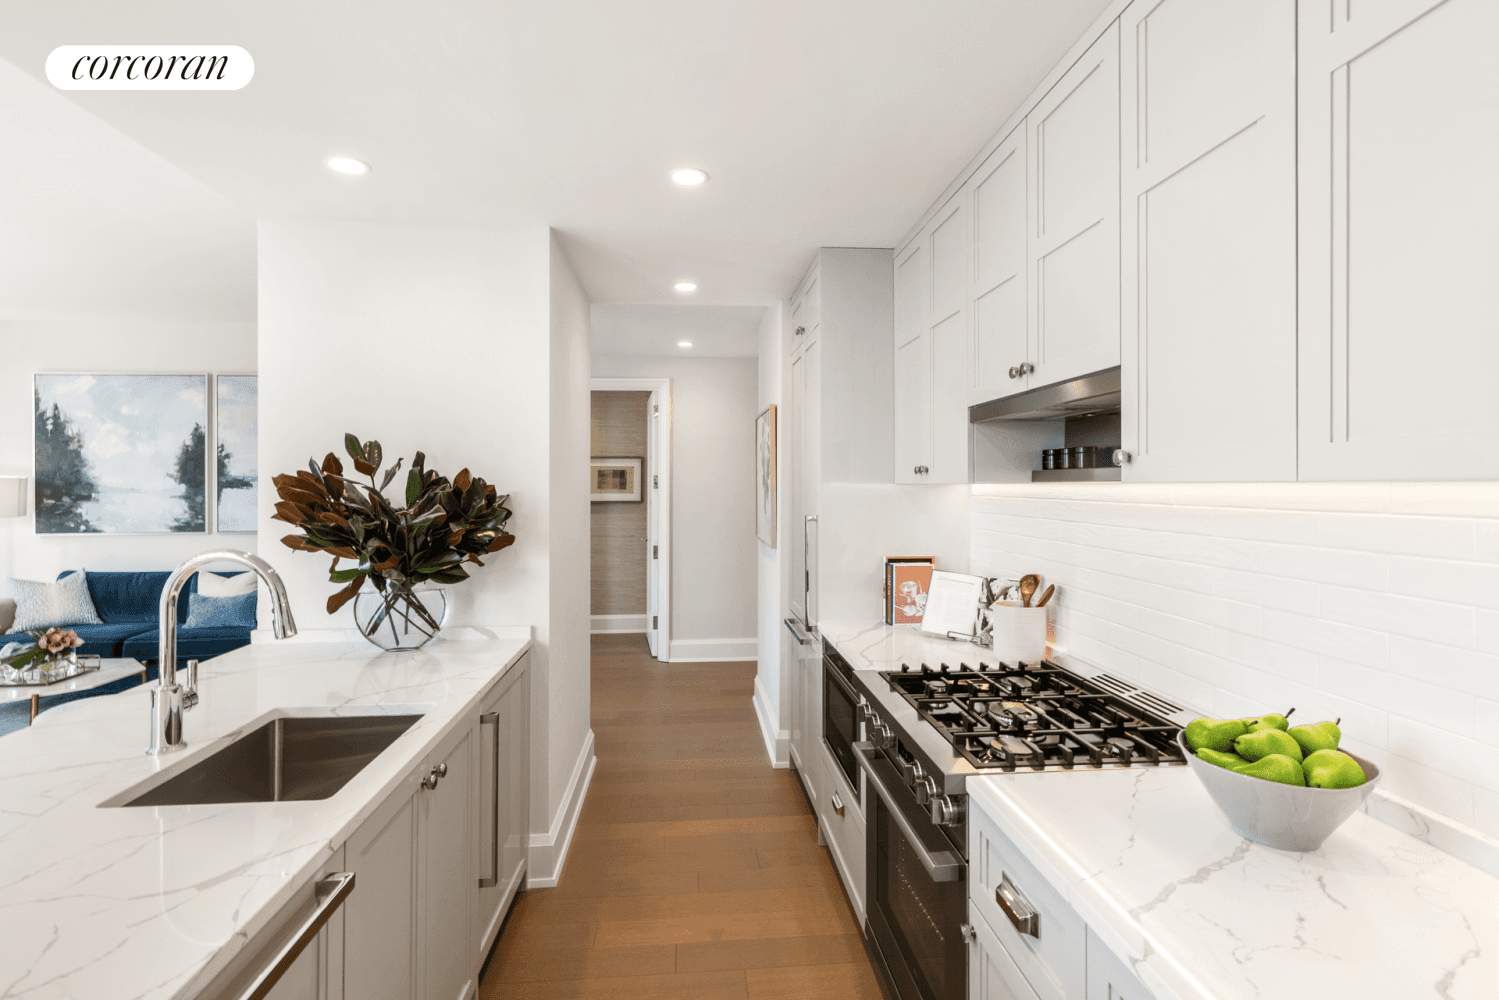 IMMEDIATE OCCUPANCYOccupying Claremont Hall's coveted southwest corner, this beautiful 1, 261 square foot two bedroom, two bathroom home showcases unmatched views of the iconic spire of Riverside Church, the Hudson ...